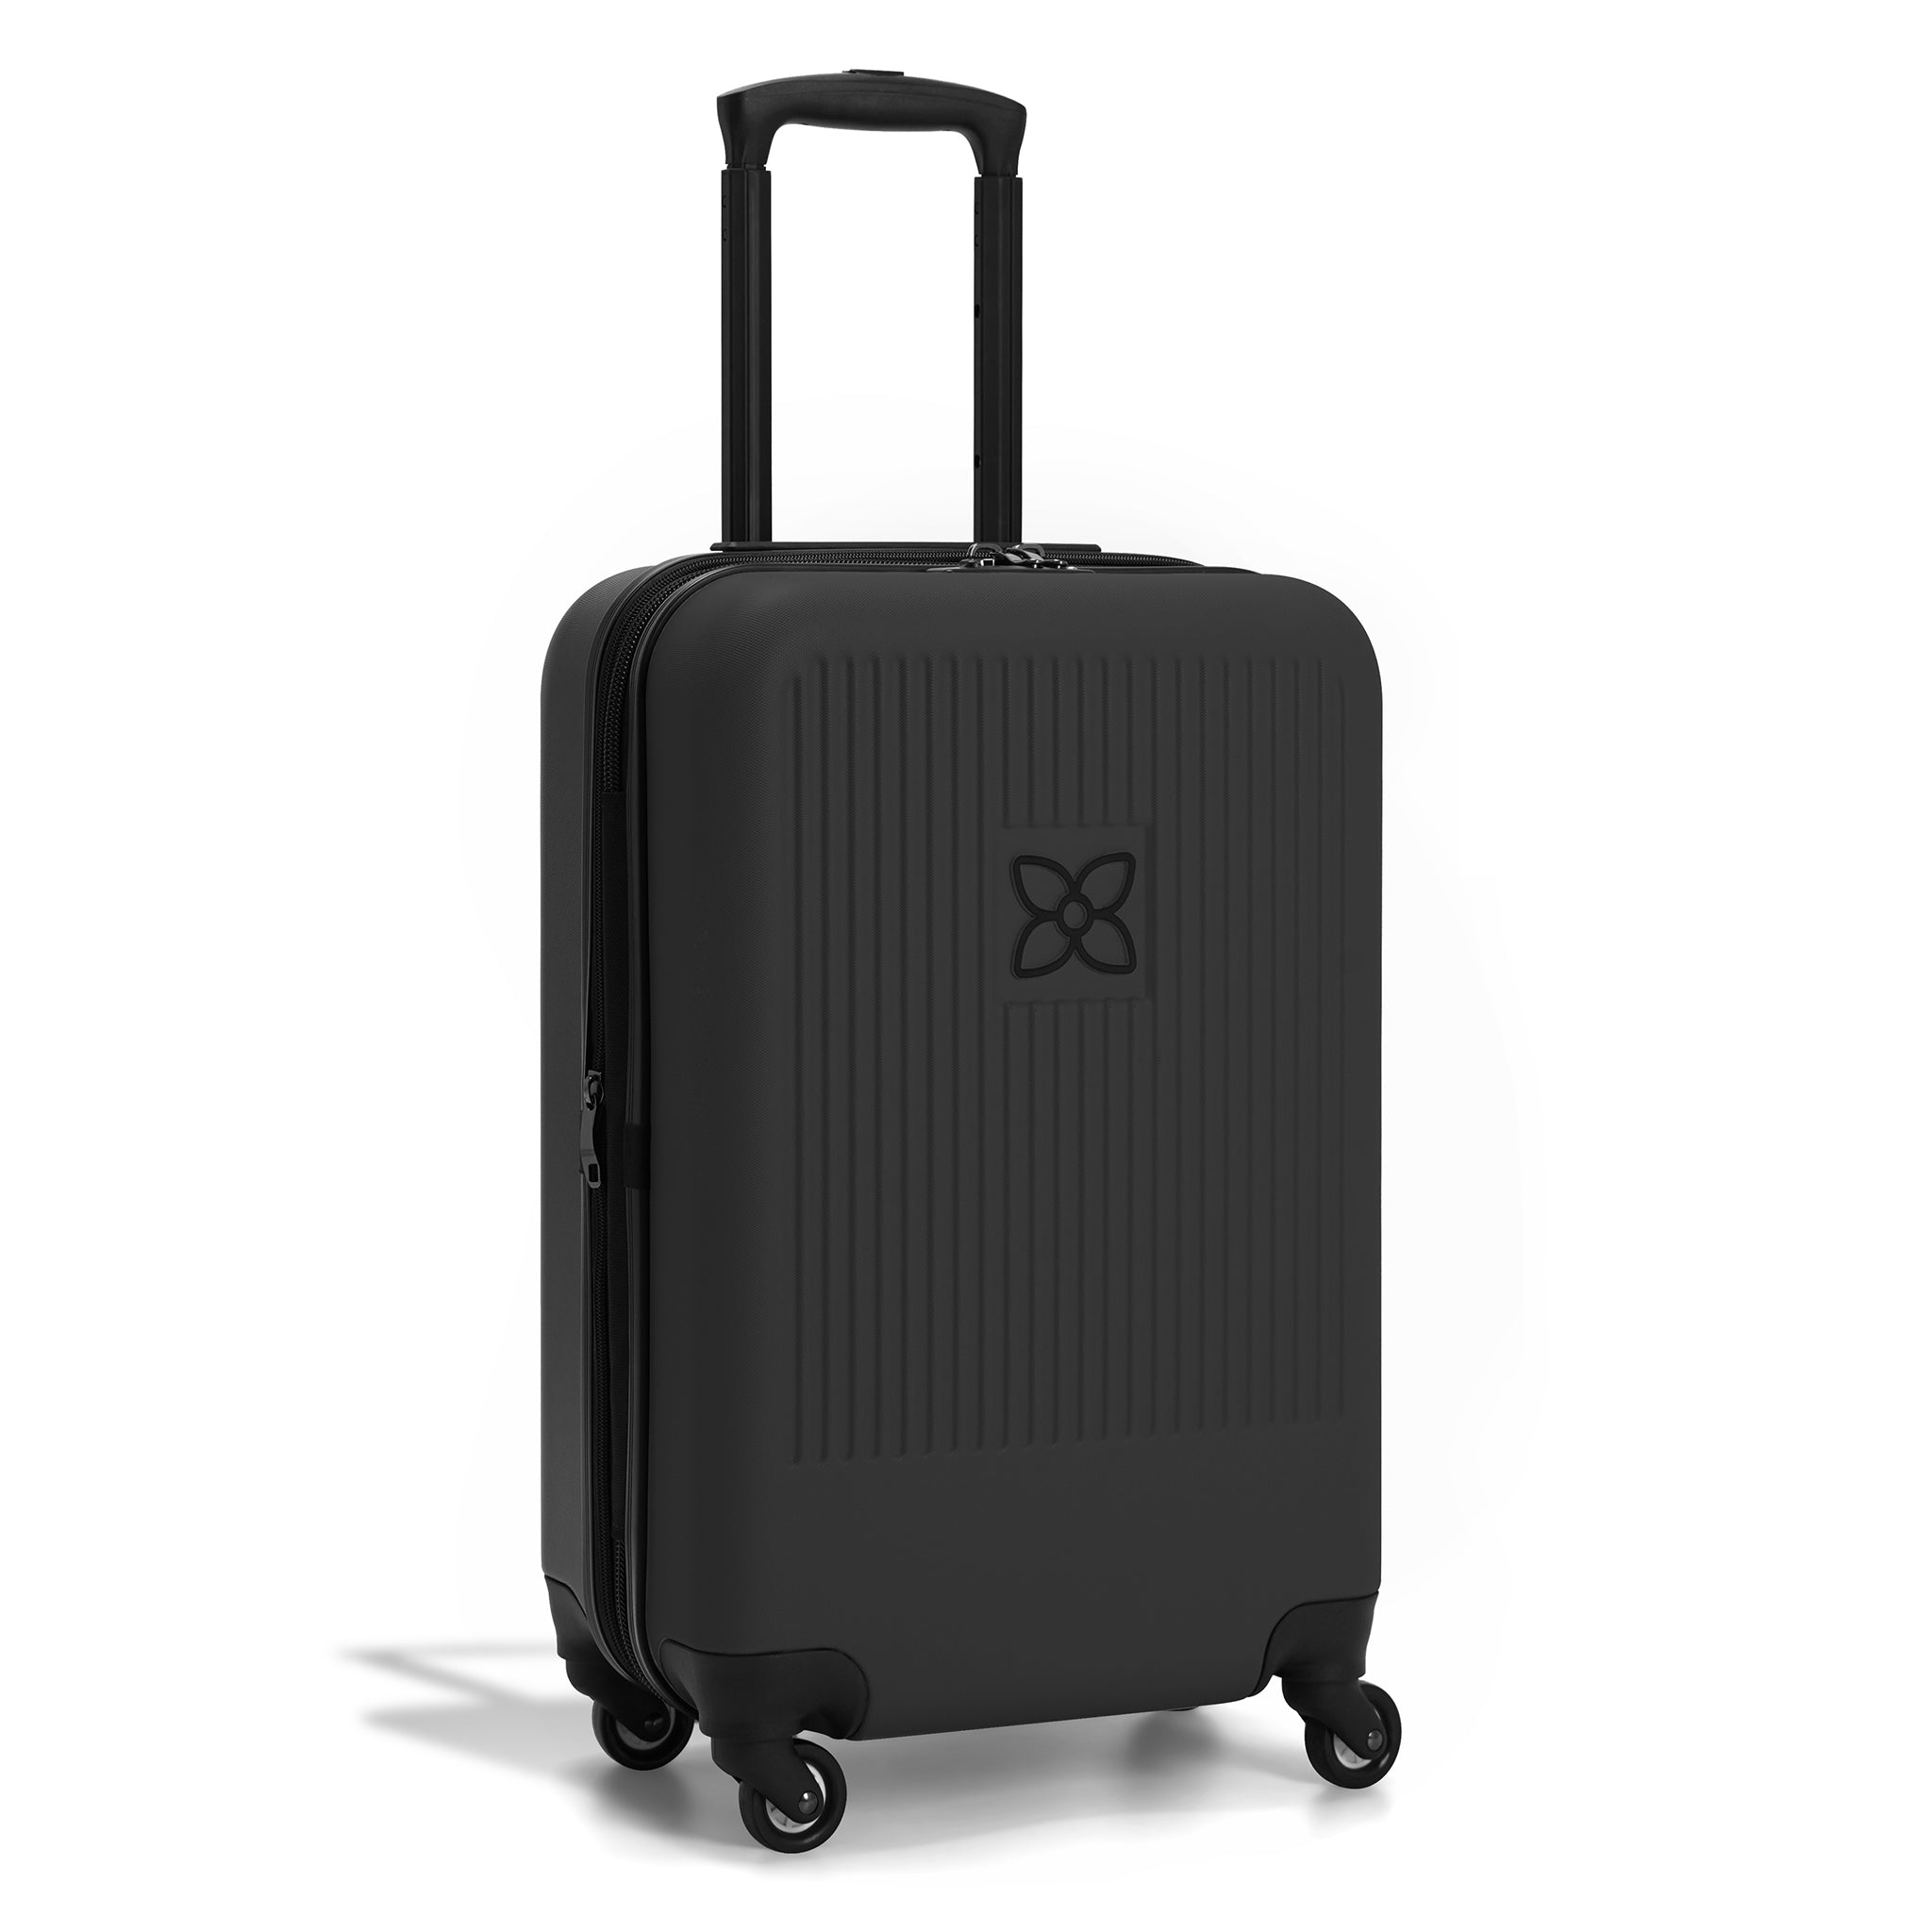 Sherpani hard shell luggage the Meridian. Part of Sherpani Travel Carry on Bundle in Classic Black. 